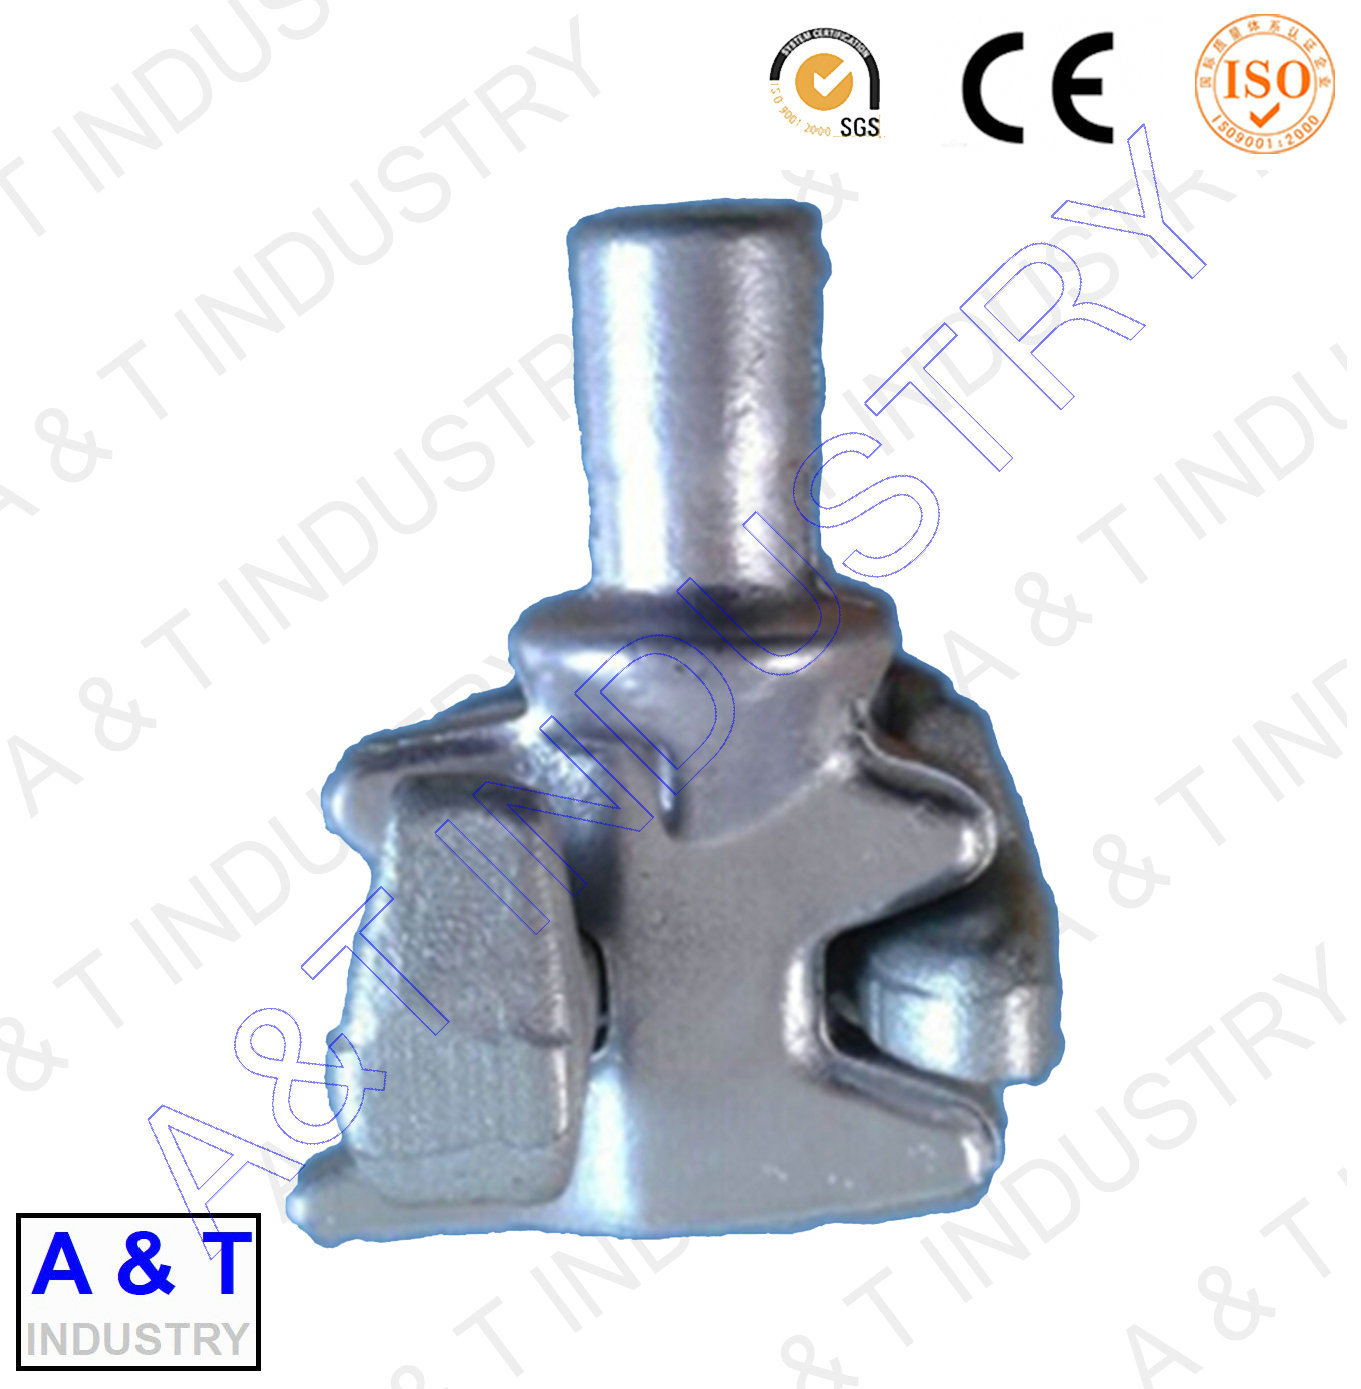 Ts-16949 & ISO-9001 Certified Carbon Steel Stainless Steel Steel Forged Truck Part